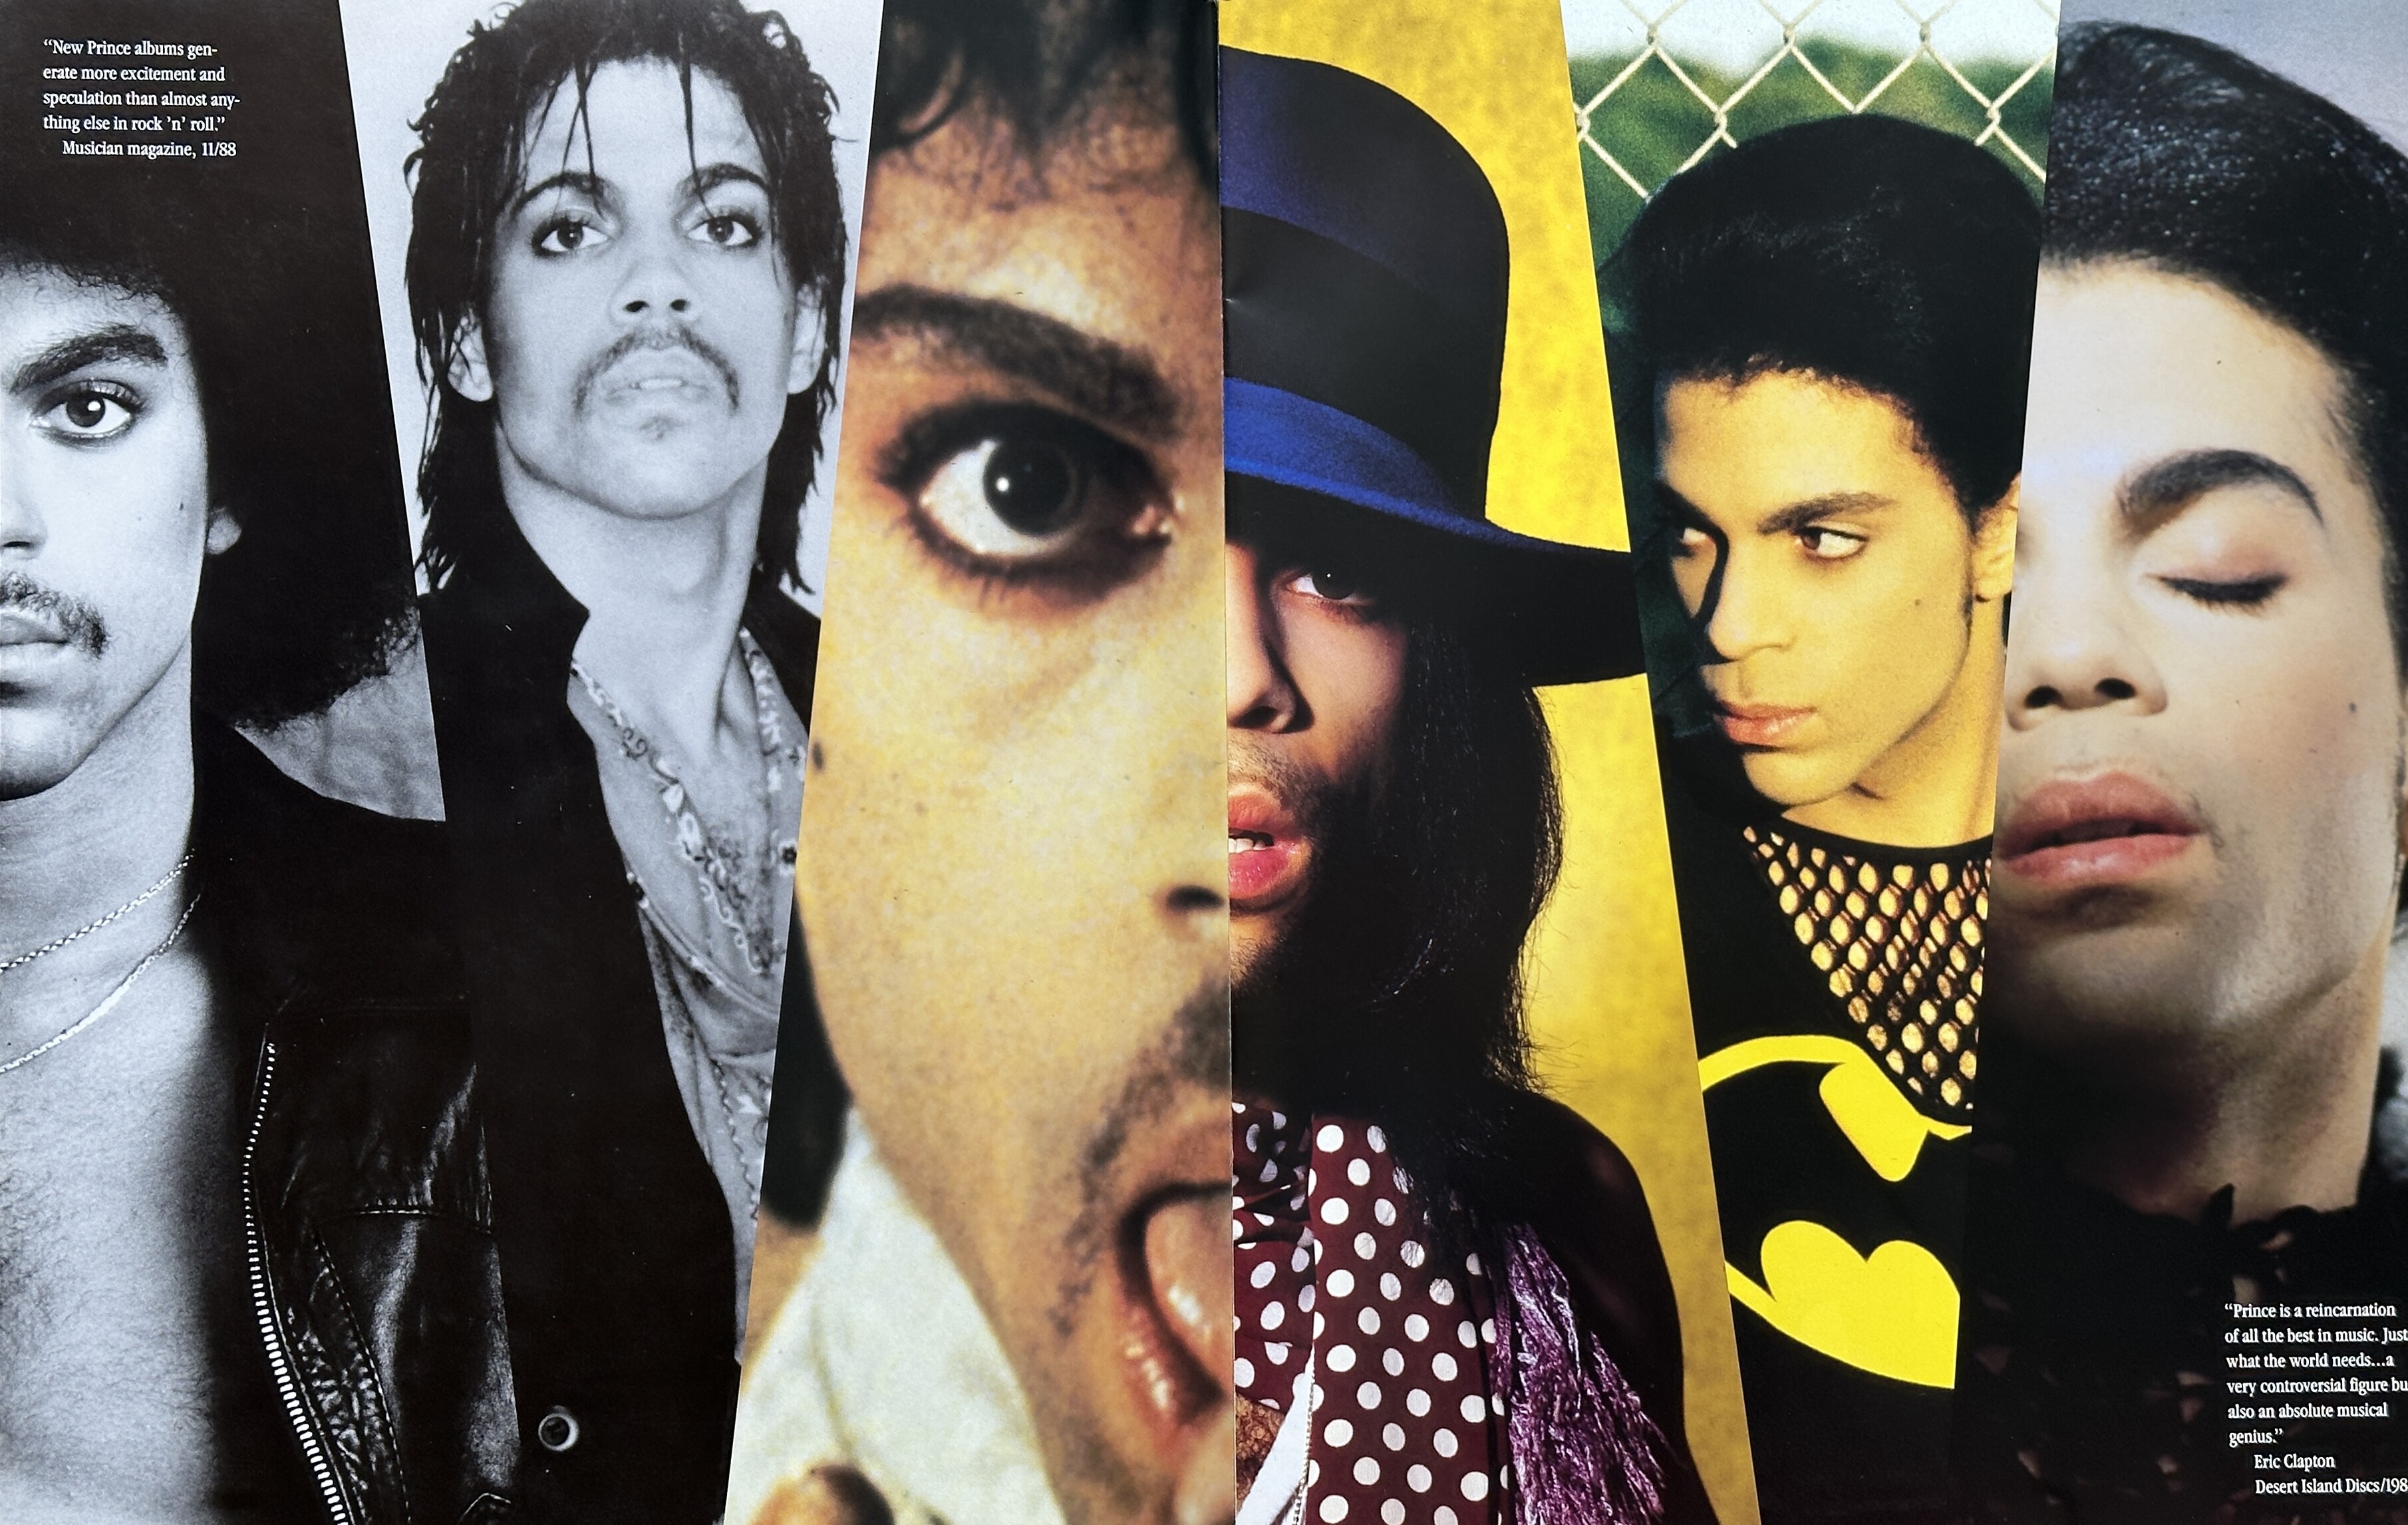 Prince montage of six different close-up shots from different eras